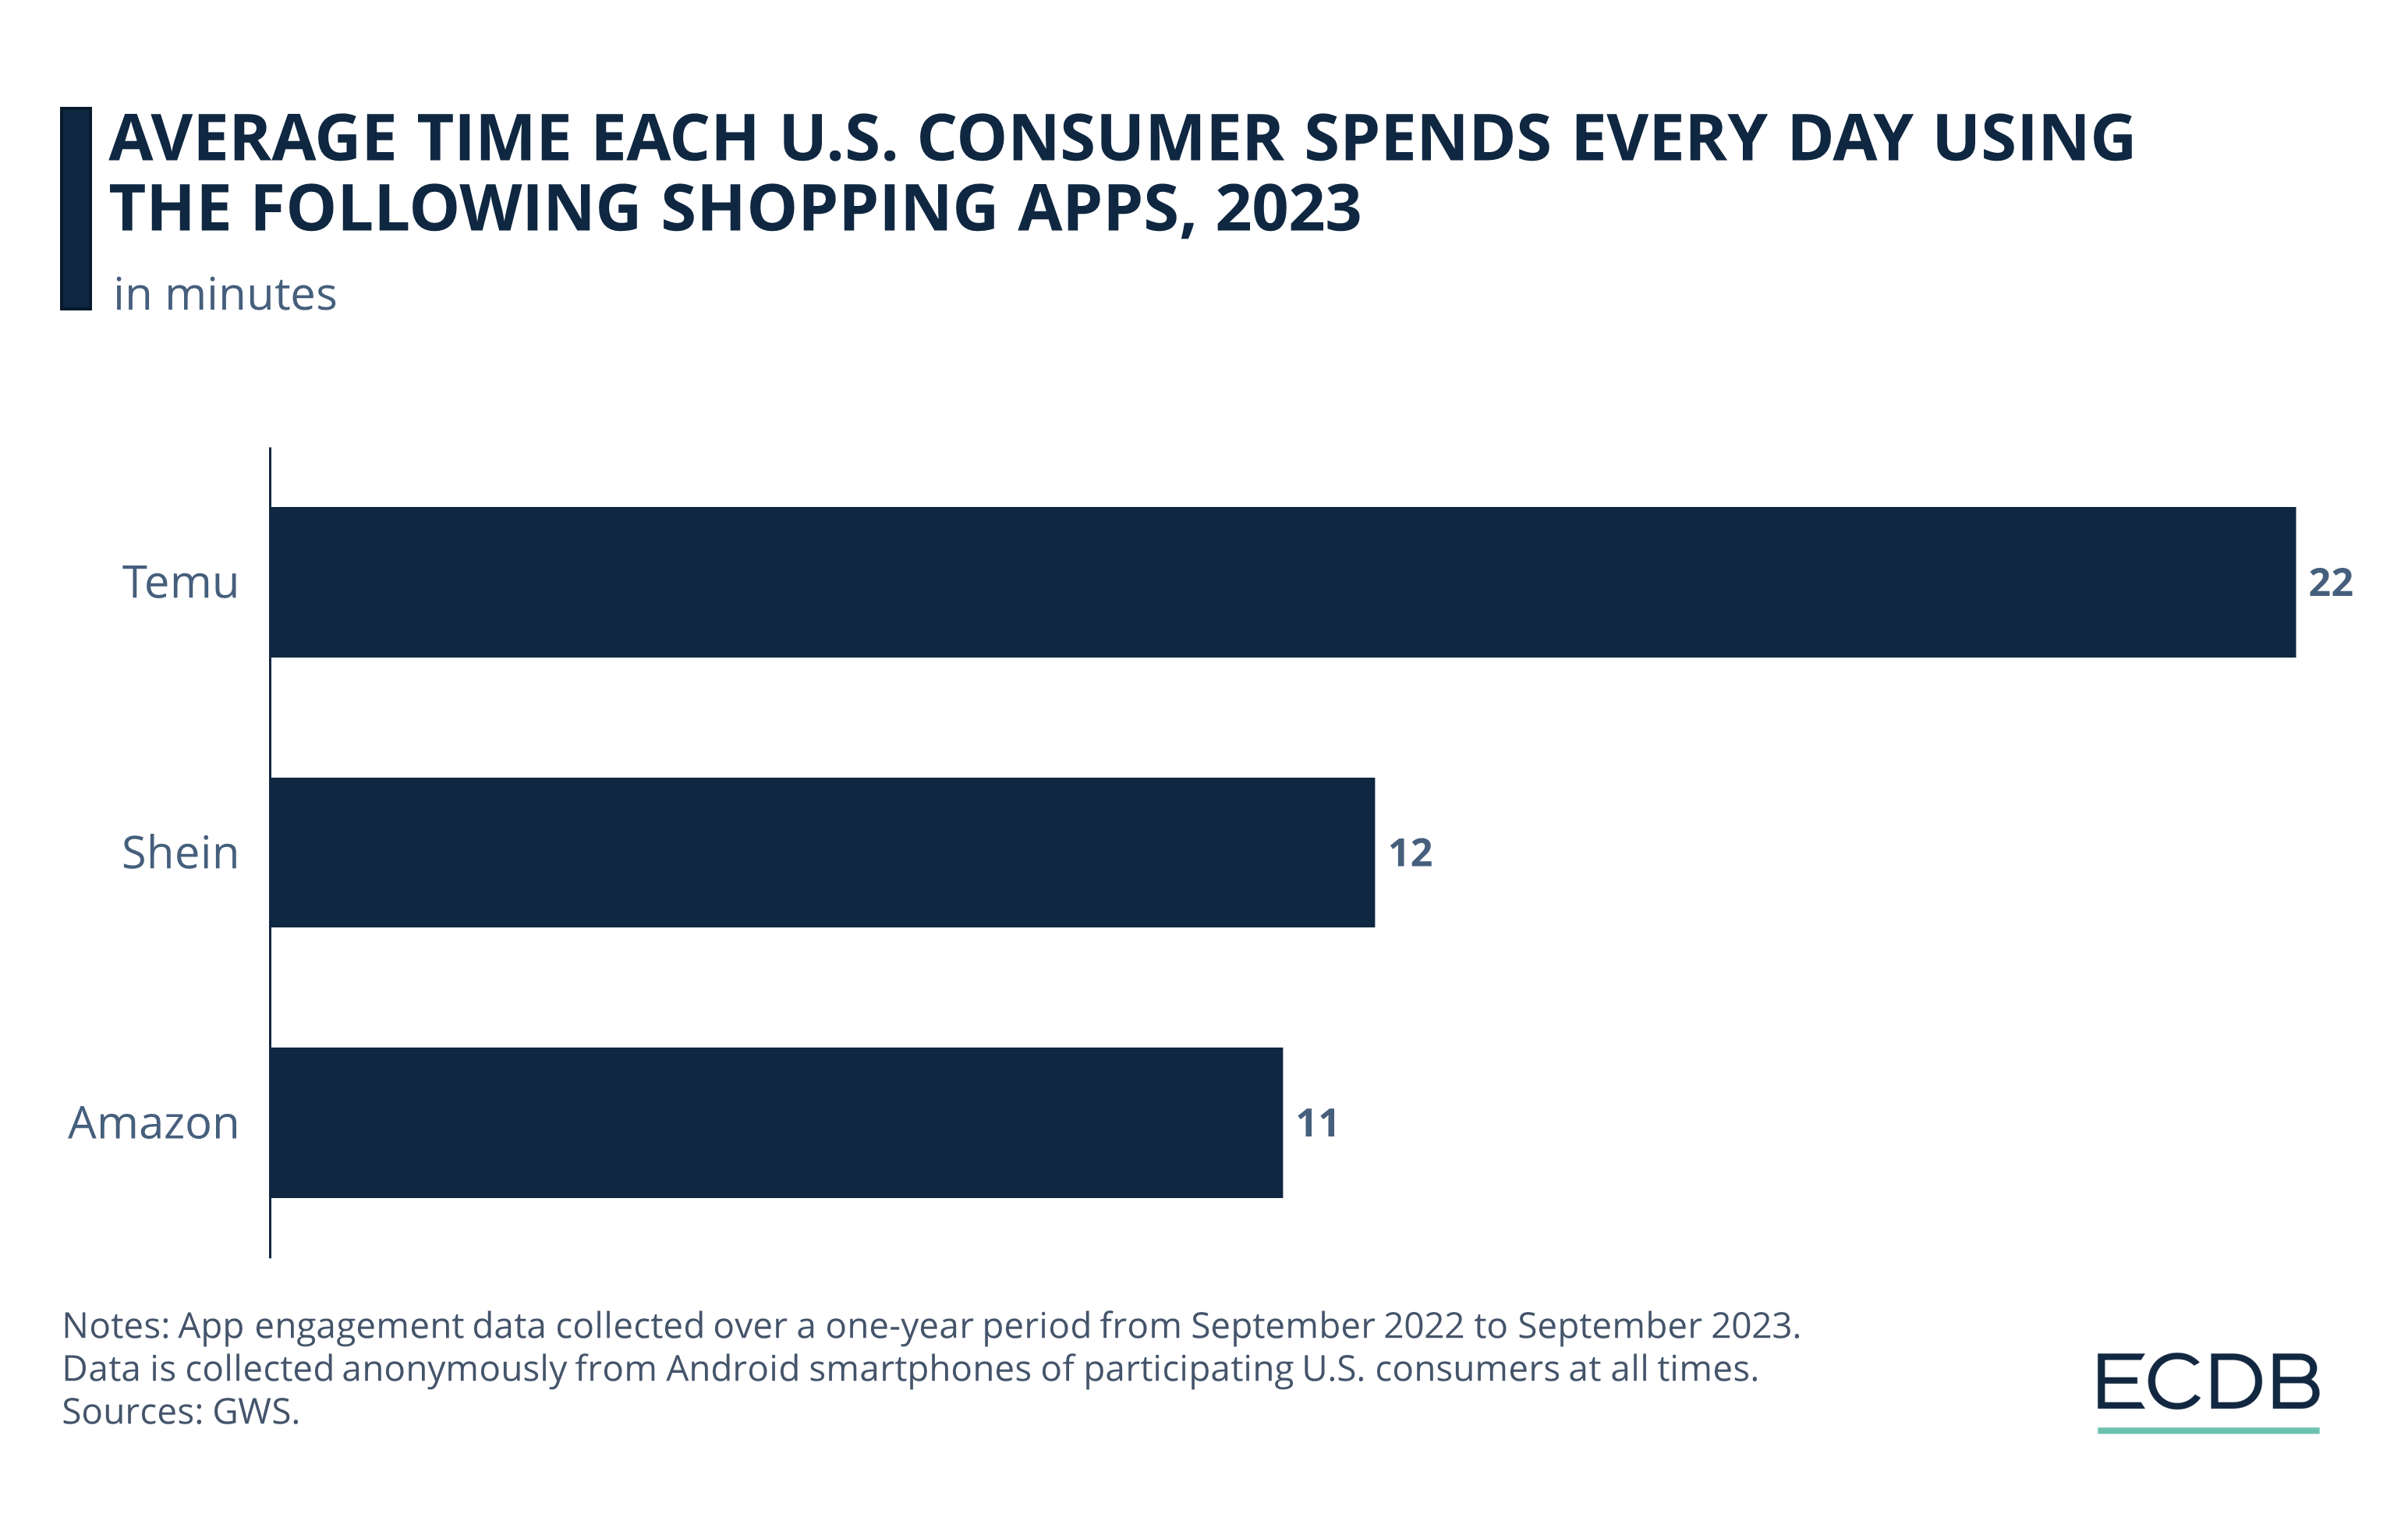 Average Time Each U.S. Consumer Spends Time Every Day on the Following Shopping Apps, 2023